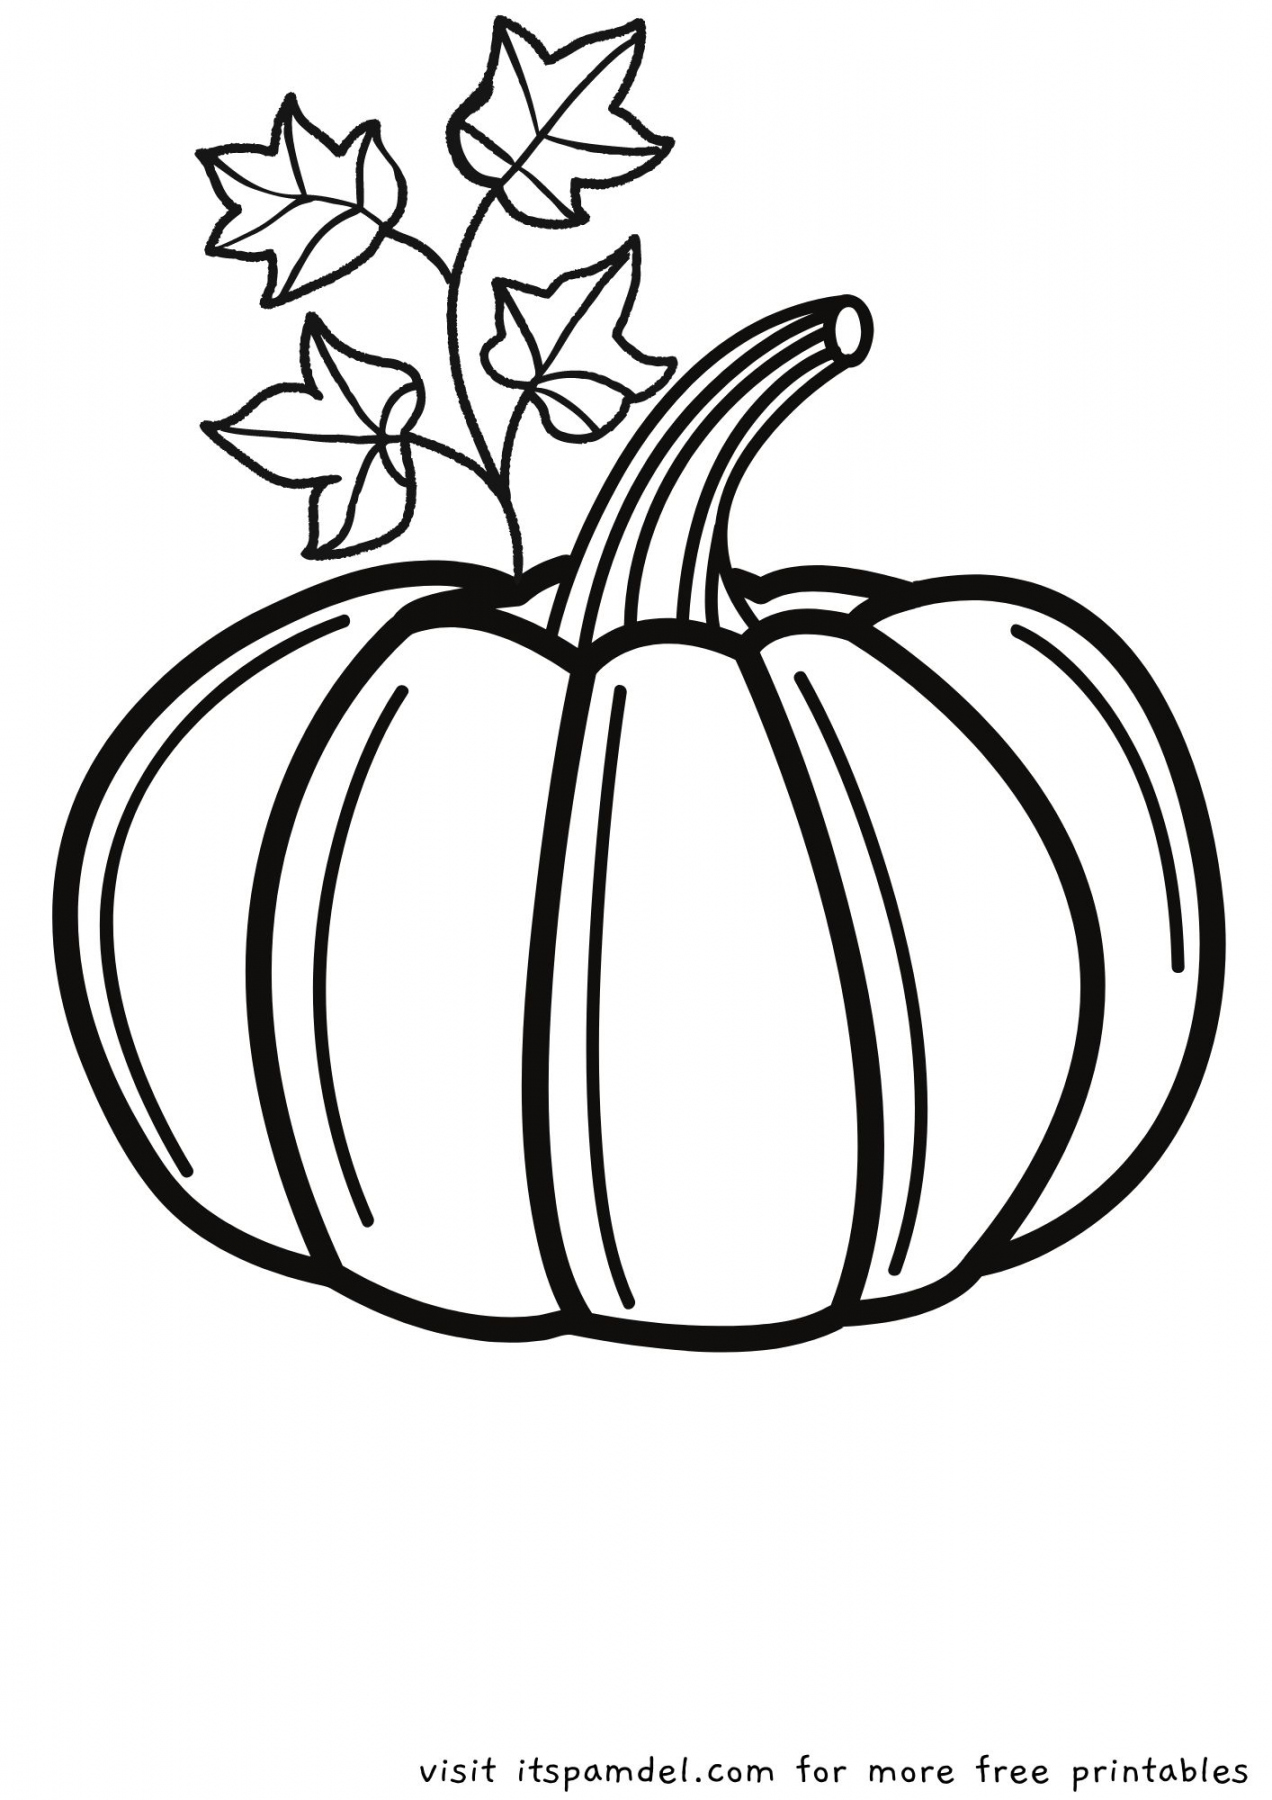 Free Printable: Fall Coloring Pages for Kids  It